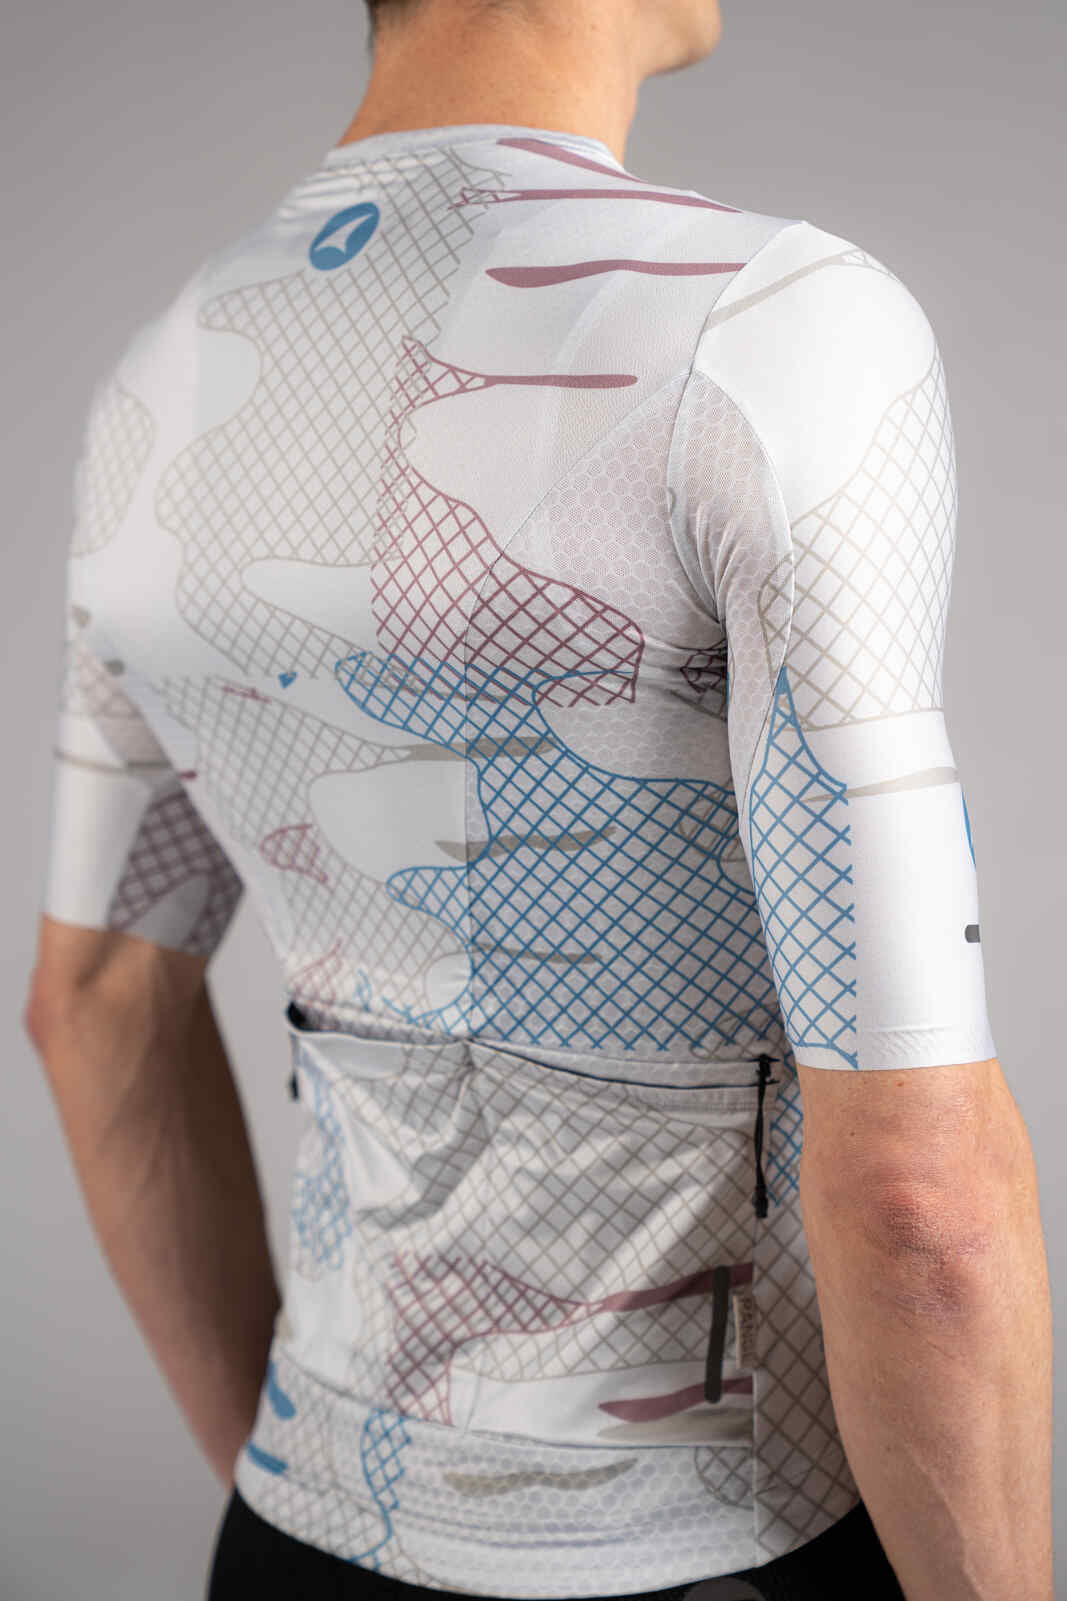 Men's White Gravel Cycling Jersey - Fabric Close-Up